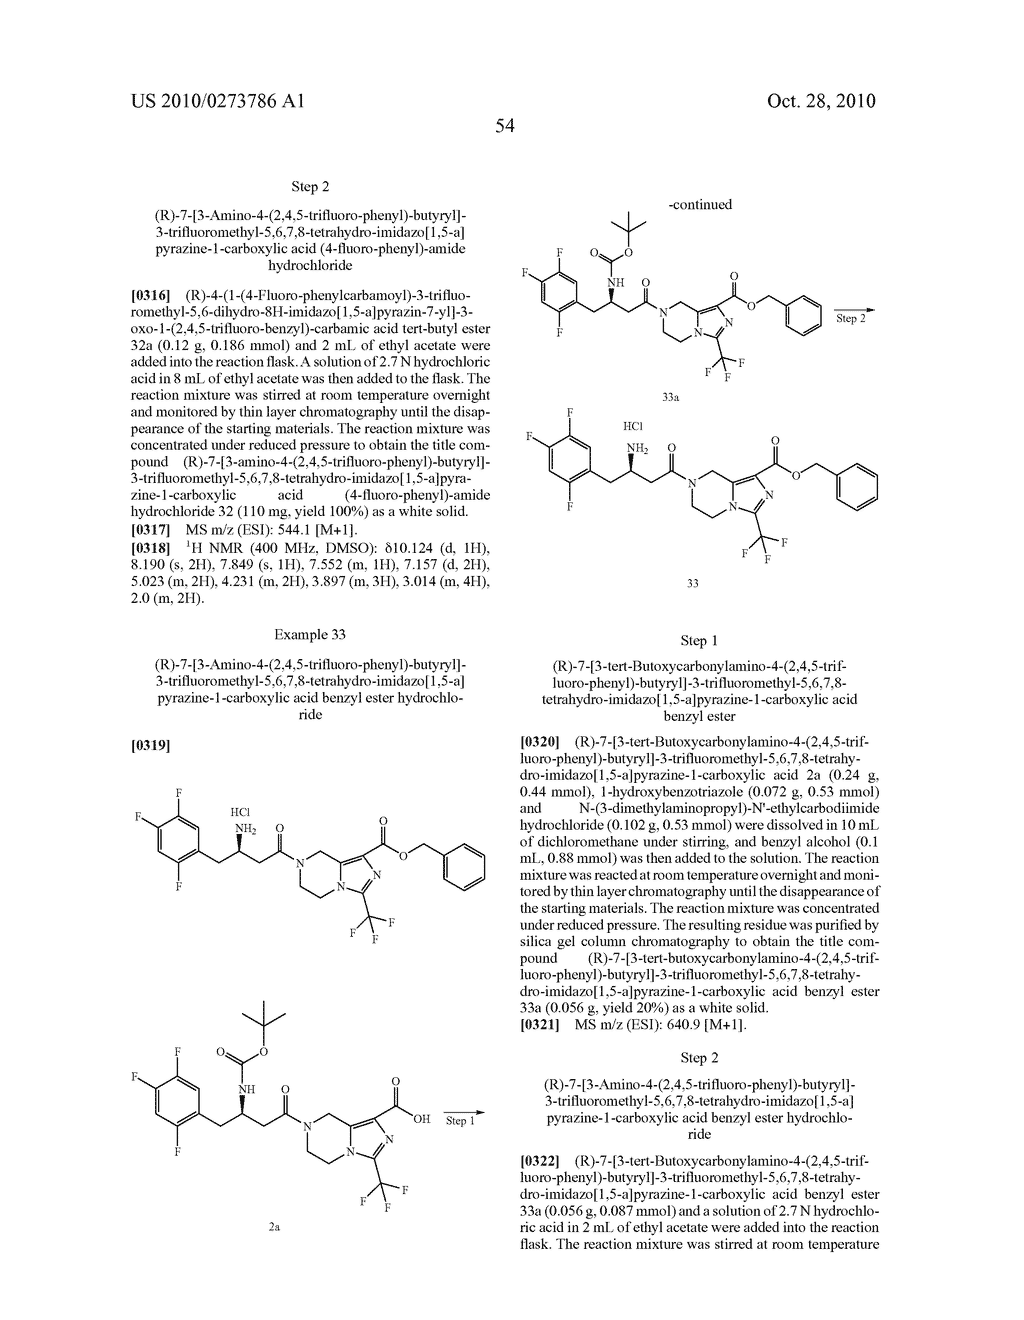 TETRAHYDRO-IMIDAZ0[1,5-A]PYRAZINE DERIVATIVES, PREPARATION PROCESS AND MEDICINAL USE THEREOF - diagram, schematic, and image 55